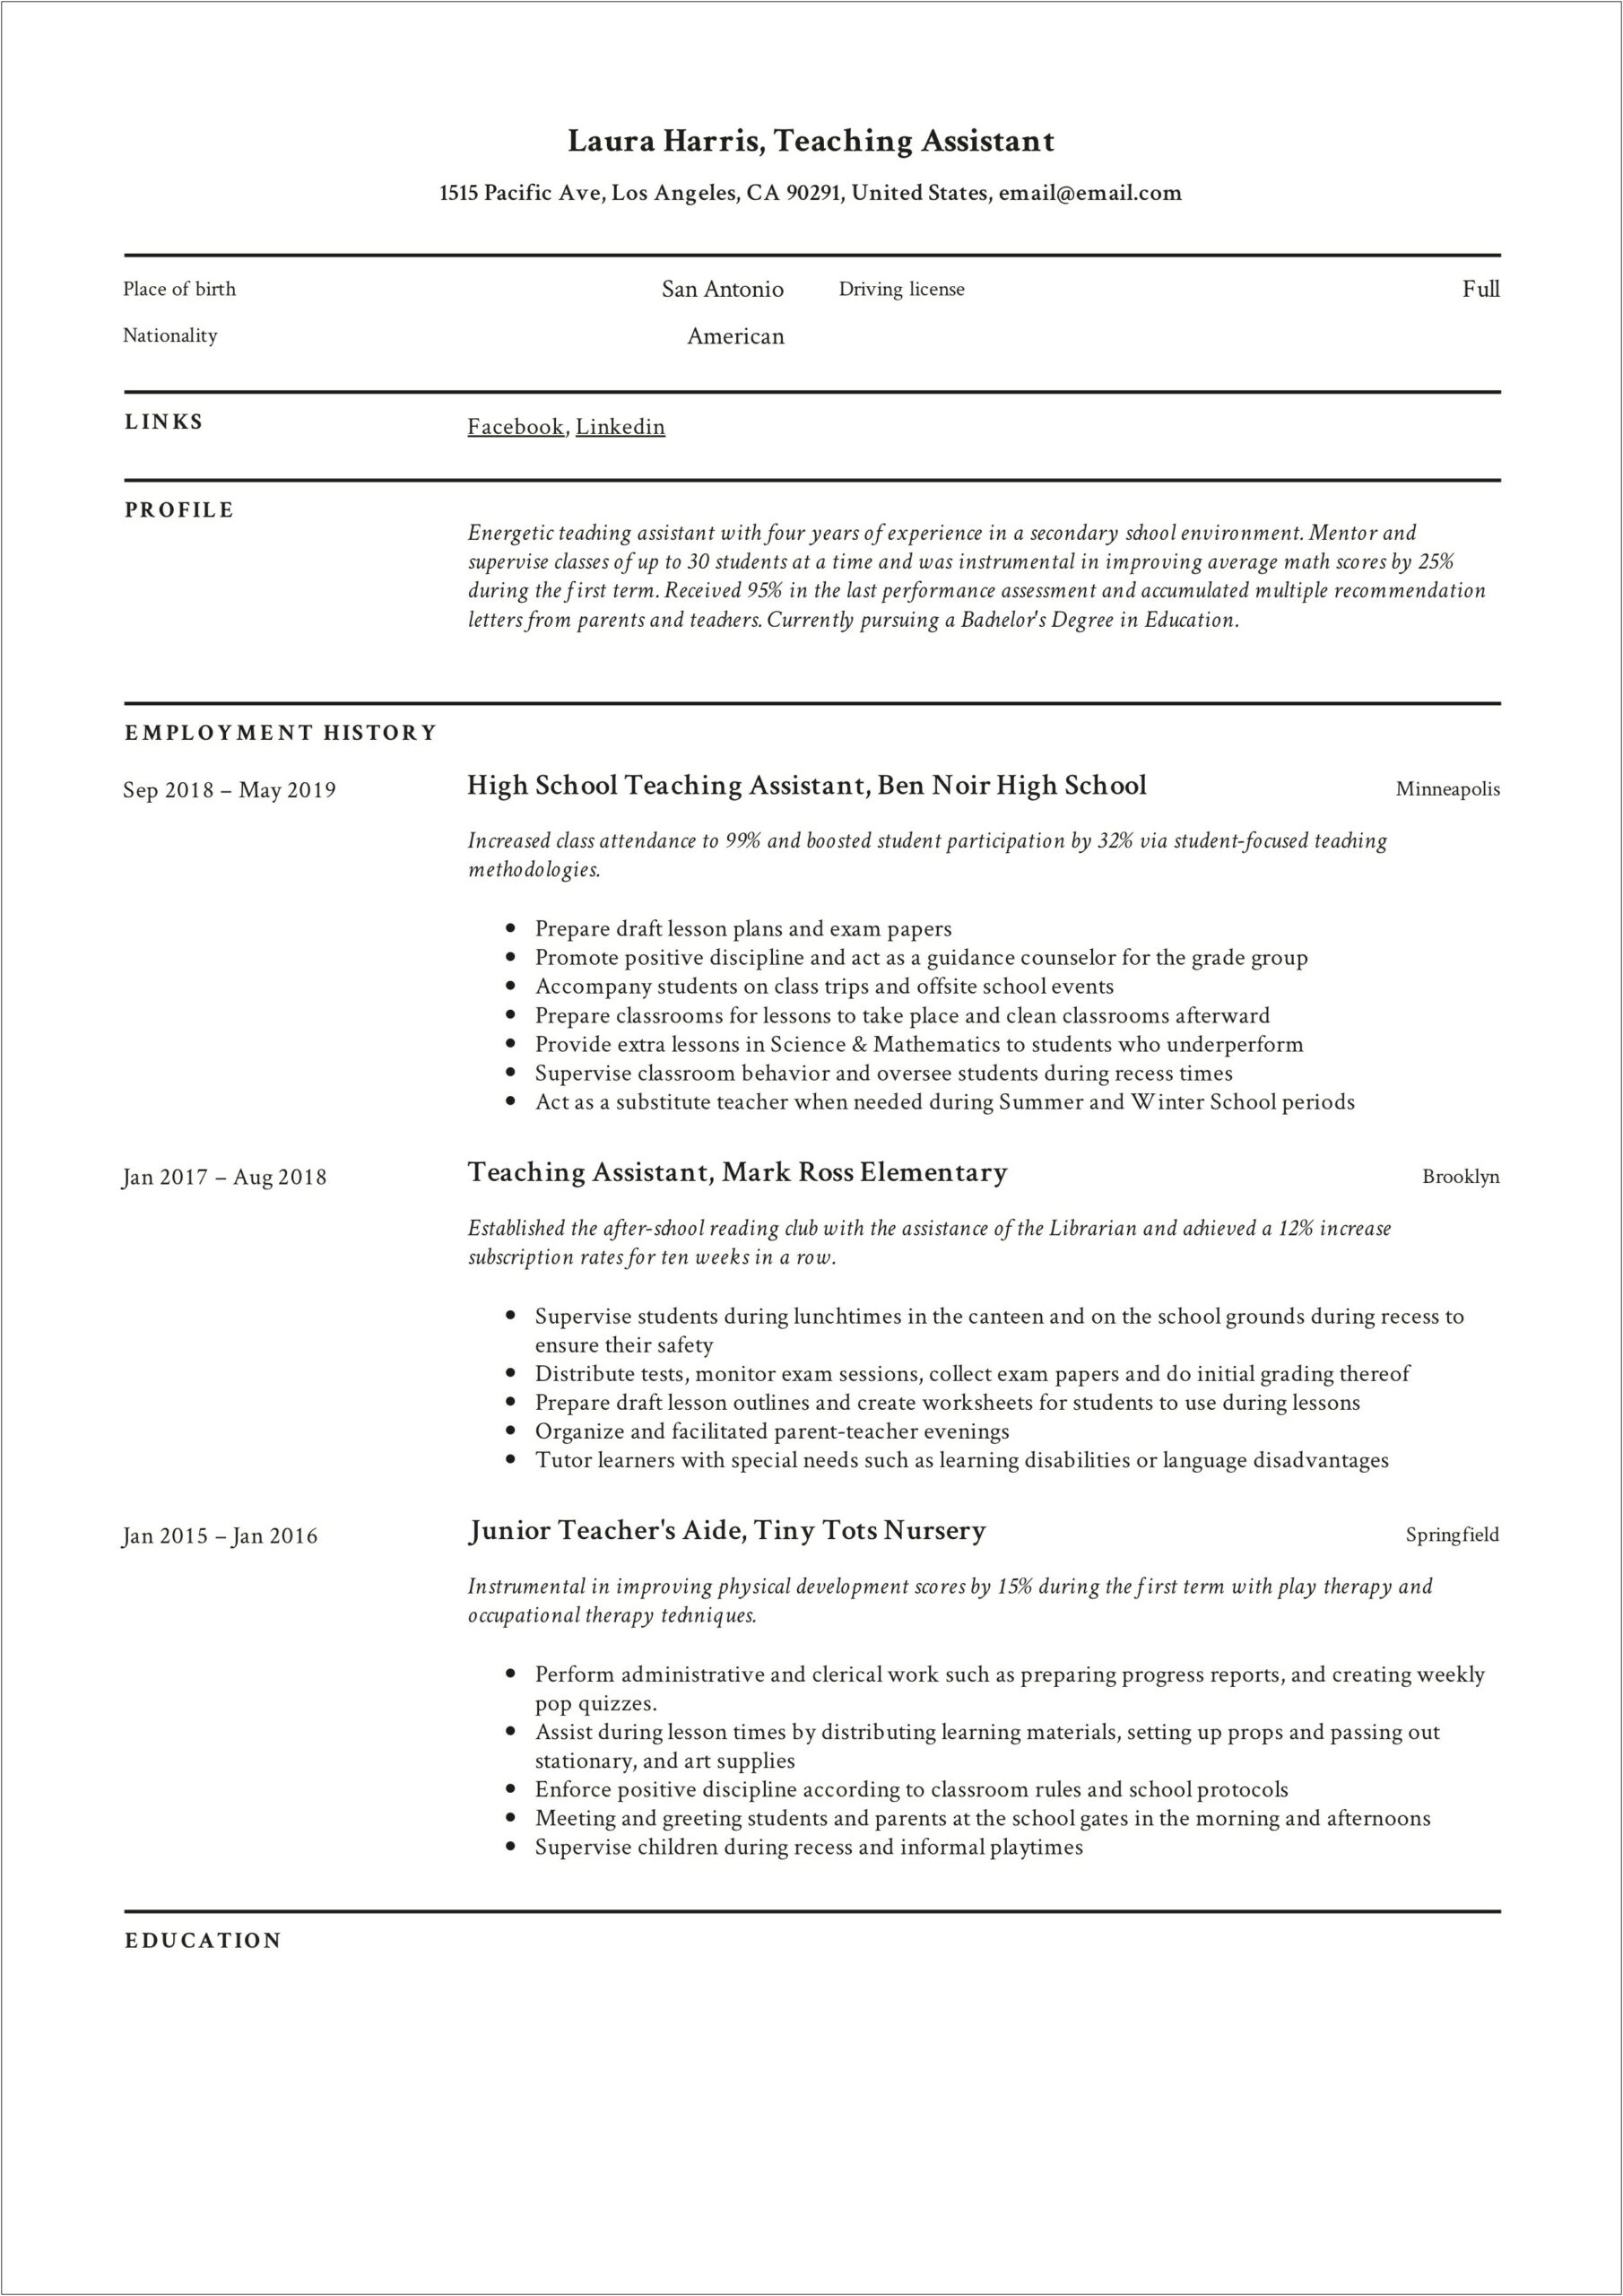 Where To Put Ta Position Resume